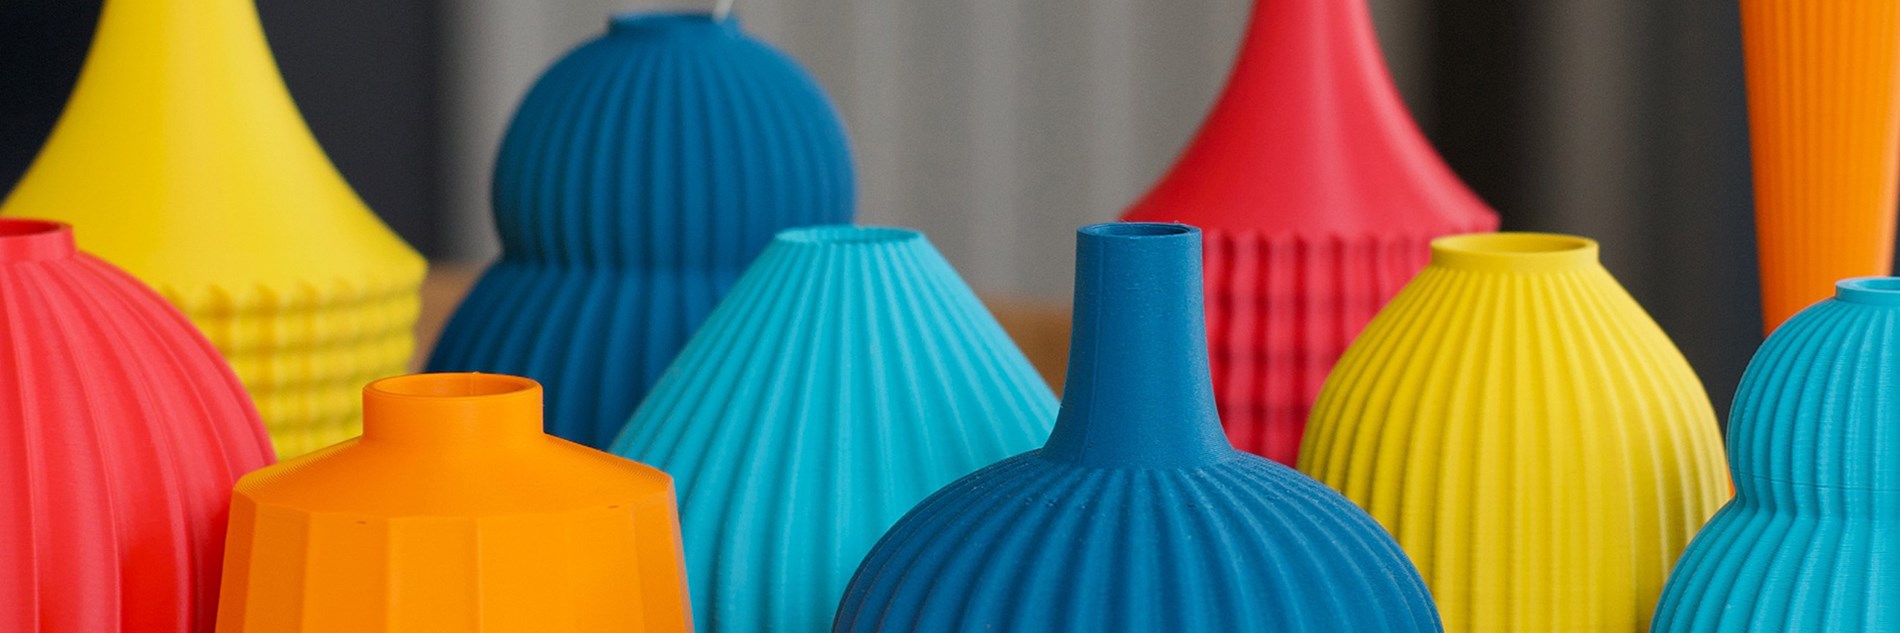 A collection of coloured vases in red, orange, yellow, blue and turquoise. The vases vary in size and shape, but each has a ridged or textured surface.